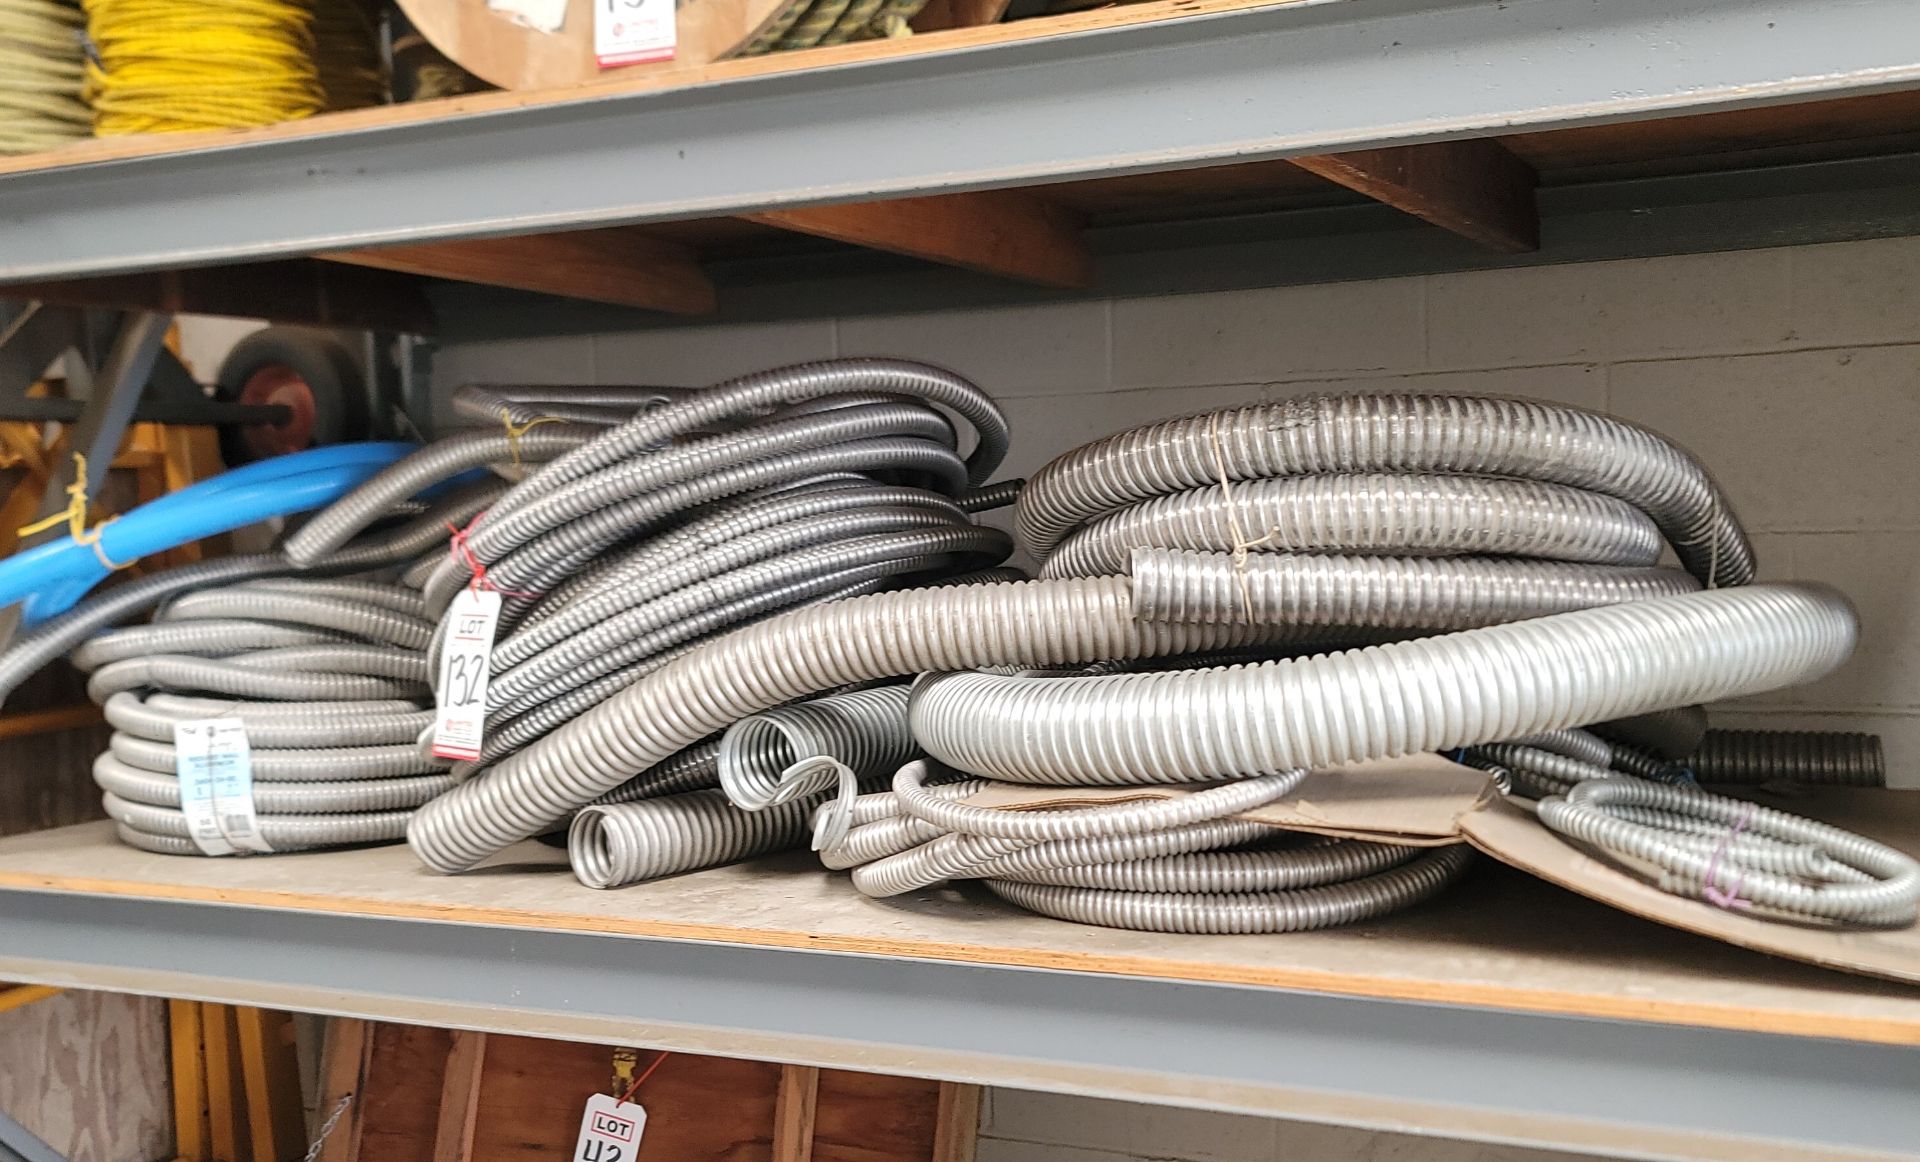 LOT - CONTENTS ONLY OF (1) SHELF, TO INCLUDE: FLEX CONDUIT